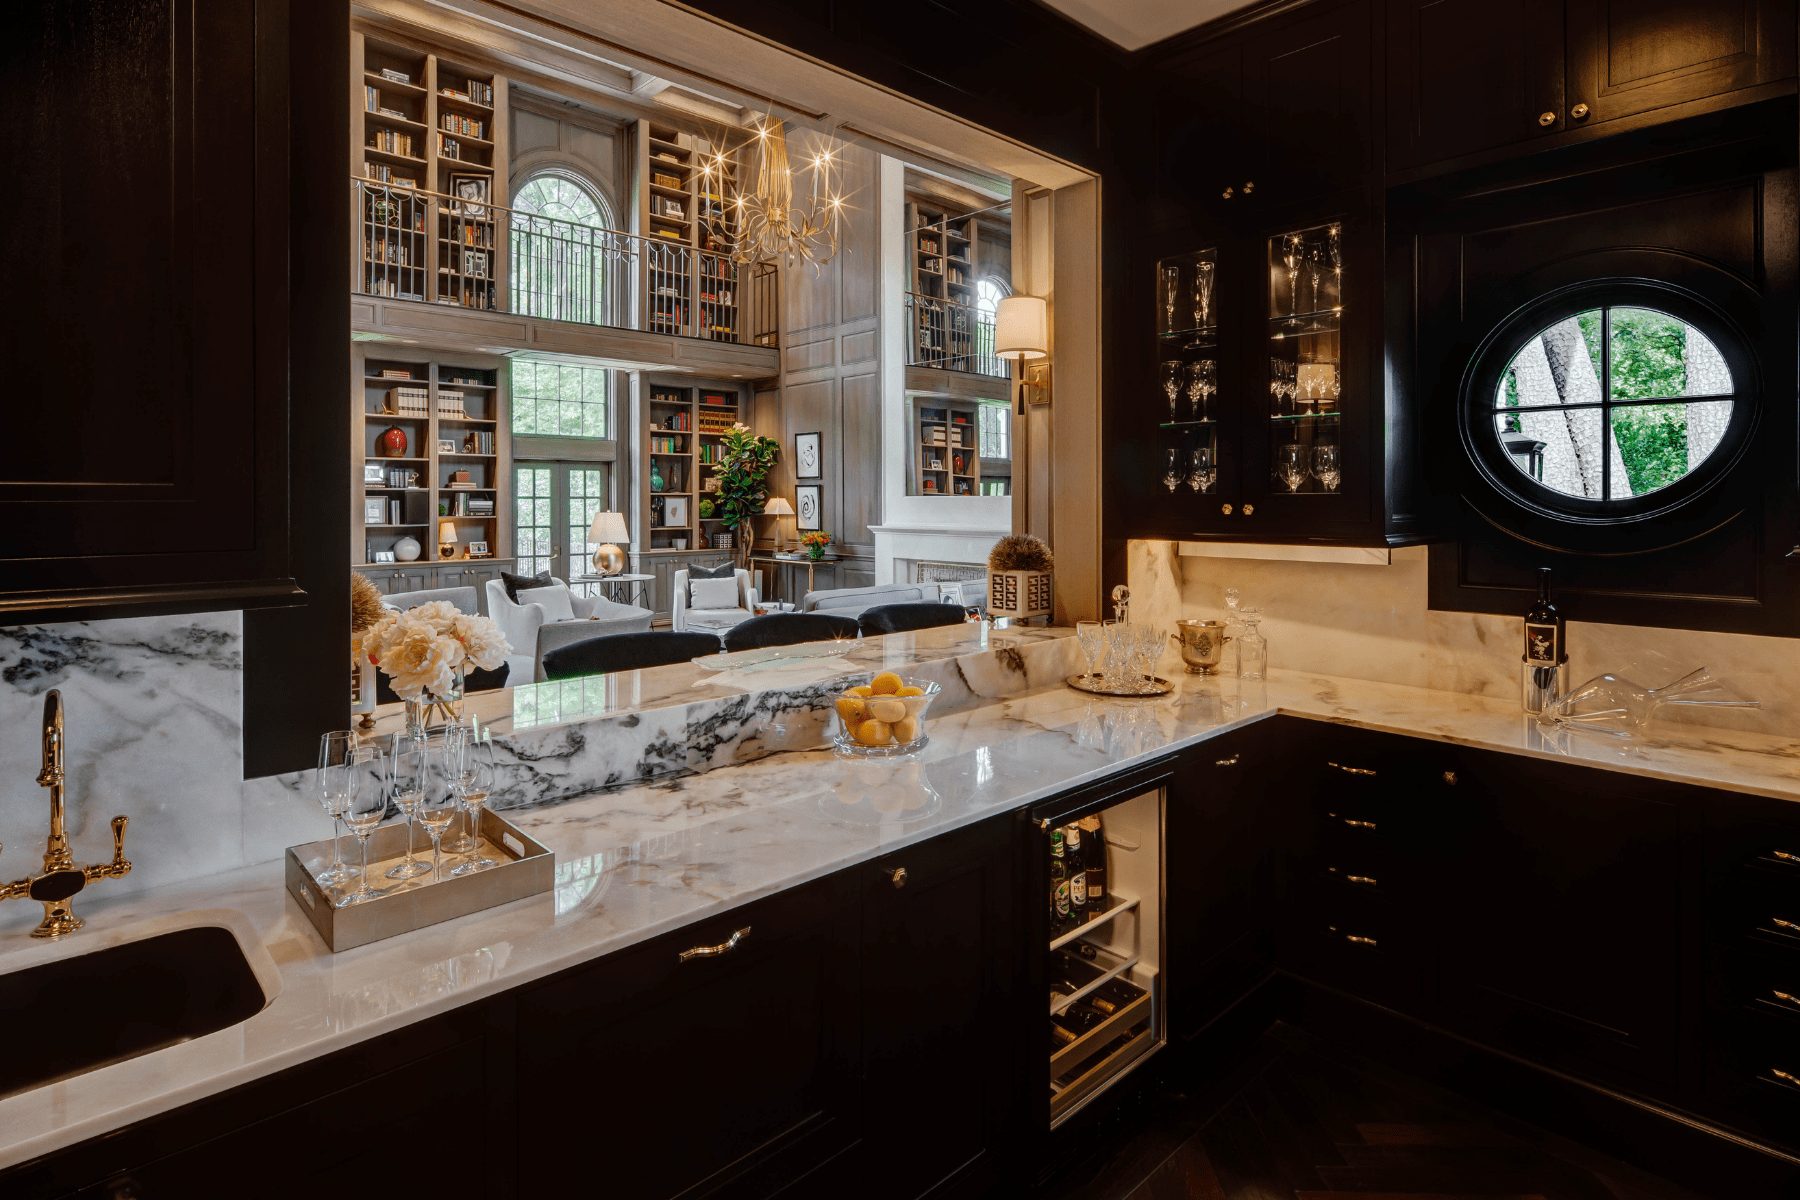 The bar at the Willowick Residence featuring sophisticated cabinetry and marble counter tops.